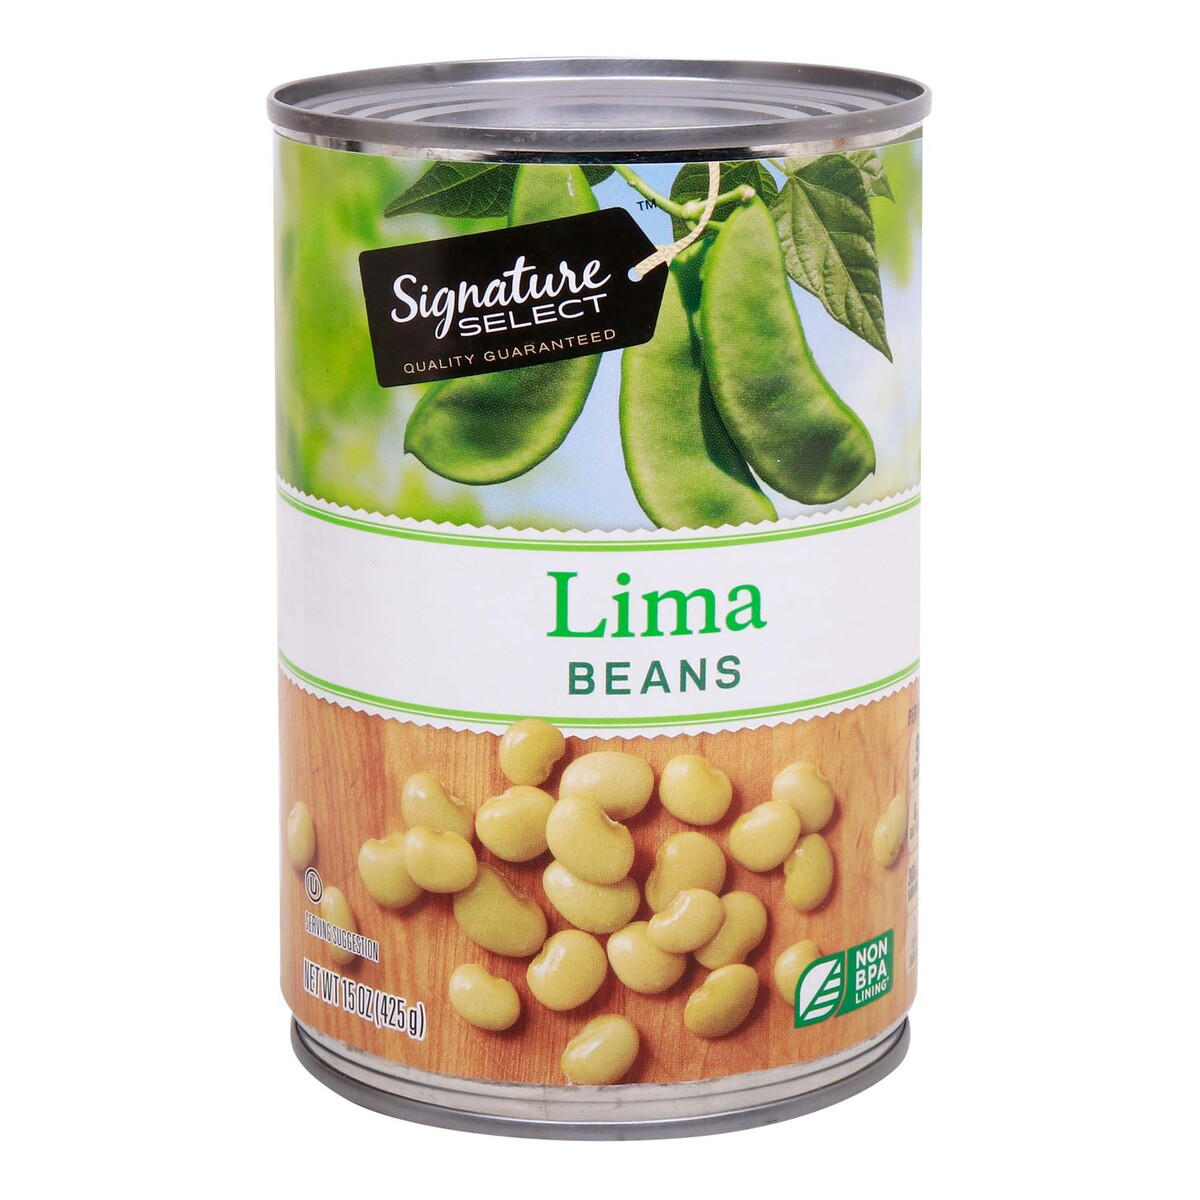 Buy Signature Select Lima Beans 425 g Online at Best Price | Canned Beans | Lulu UAE in UAE